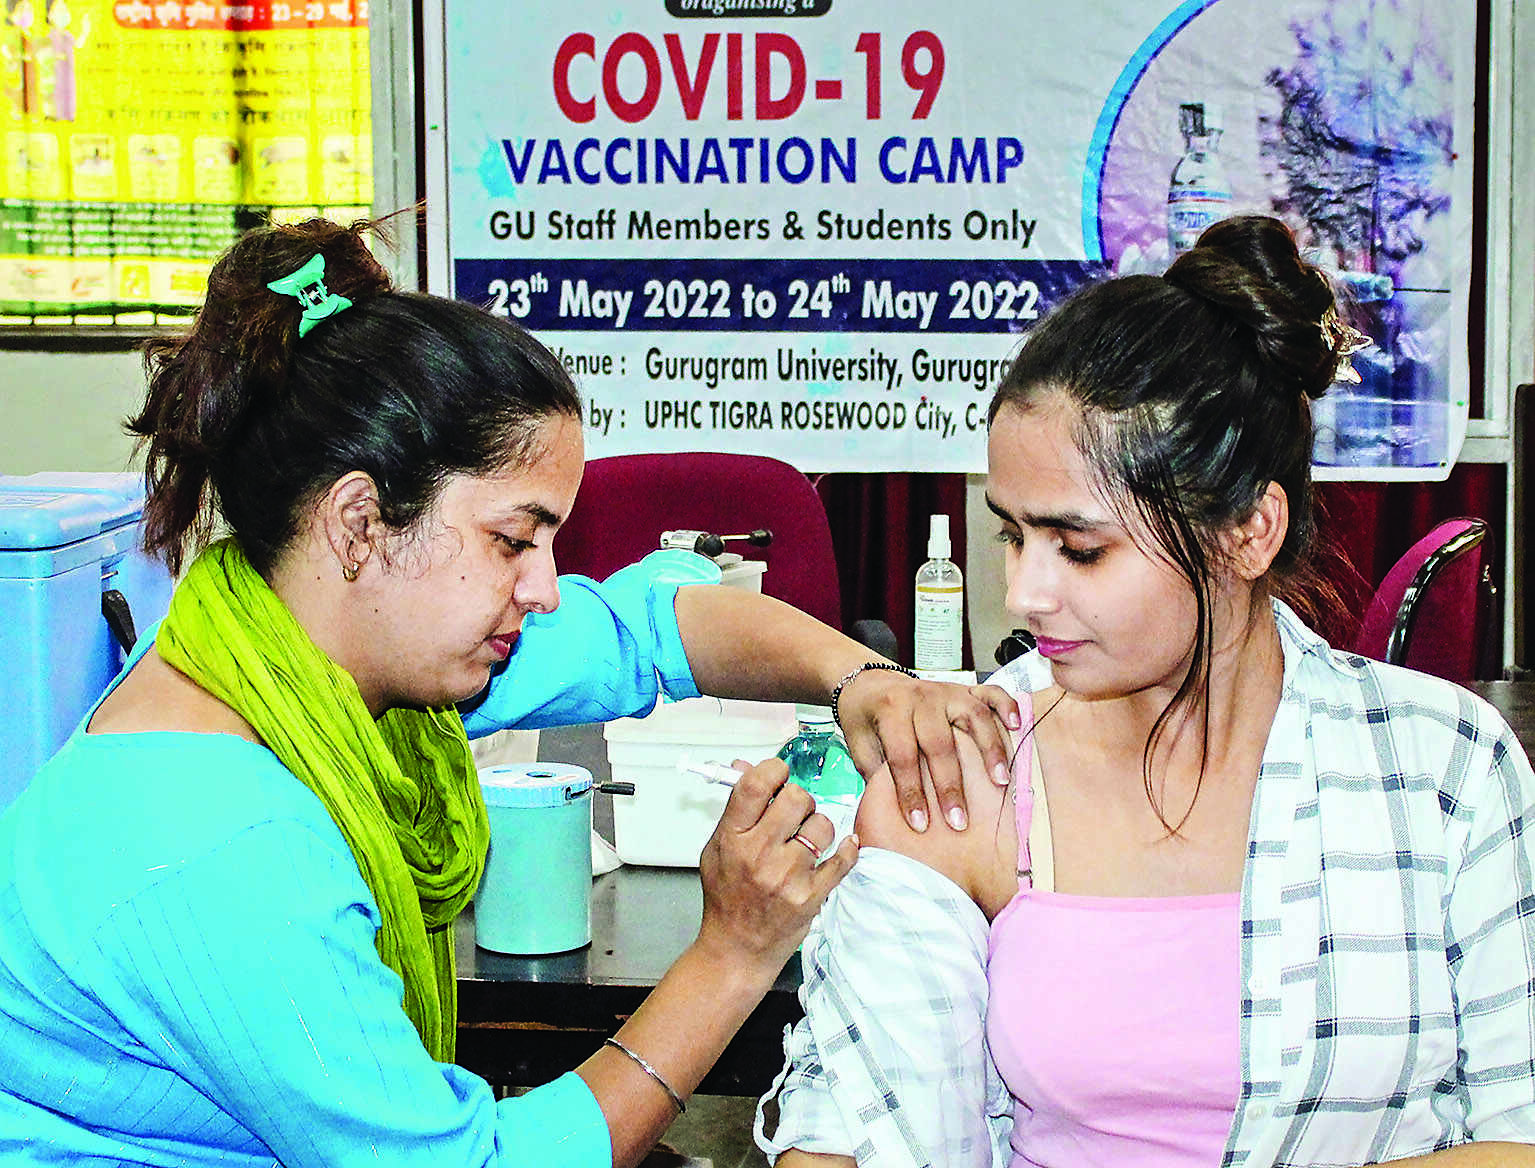 In 15-18 years age group, over 80% got first vaccine dose: Mandaviya